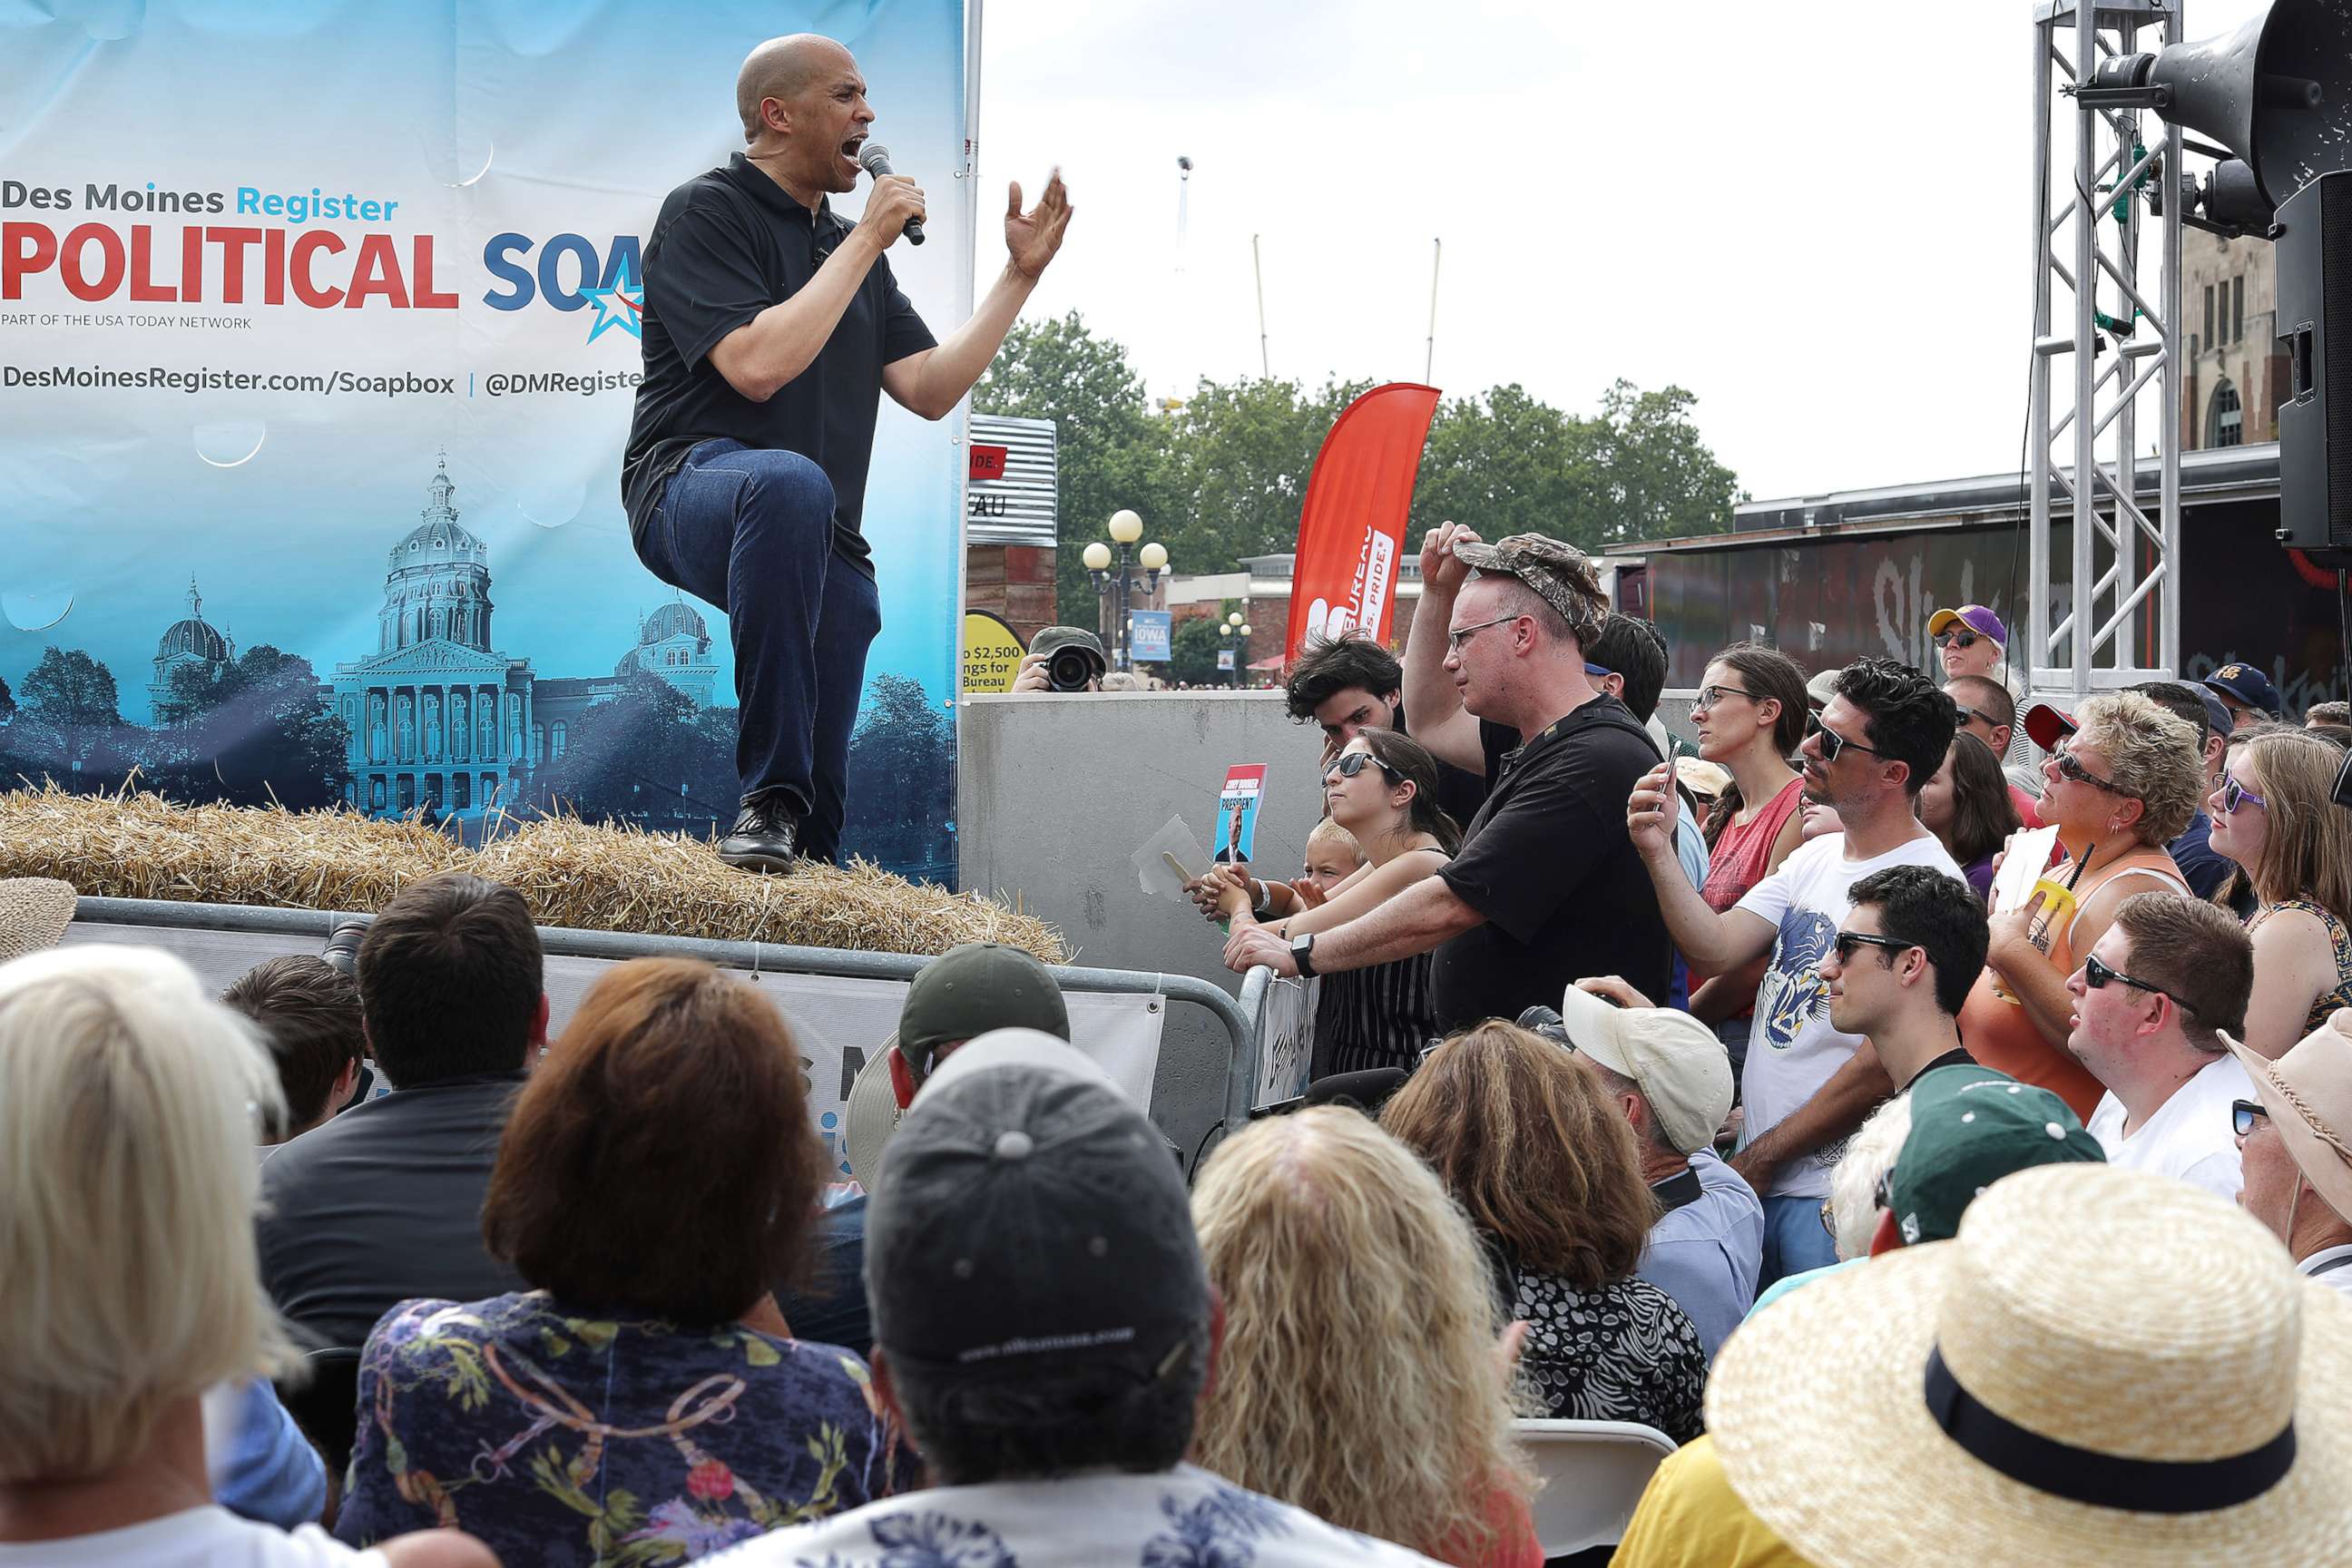 PHOTO: Democratic presidential candidate Sen. Cory Booker delivers a 20-minute campaign speech at the Des Moines Register Political Soapbox at the Iowa State Fair August 10, 2019, in Des Moines, Iowa.